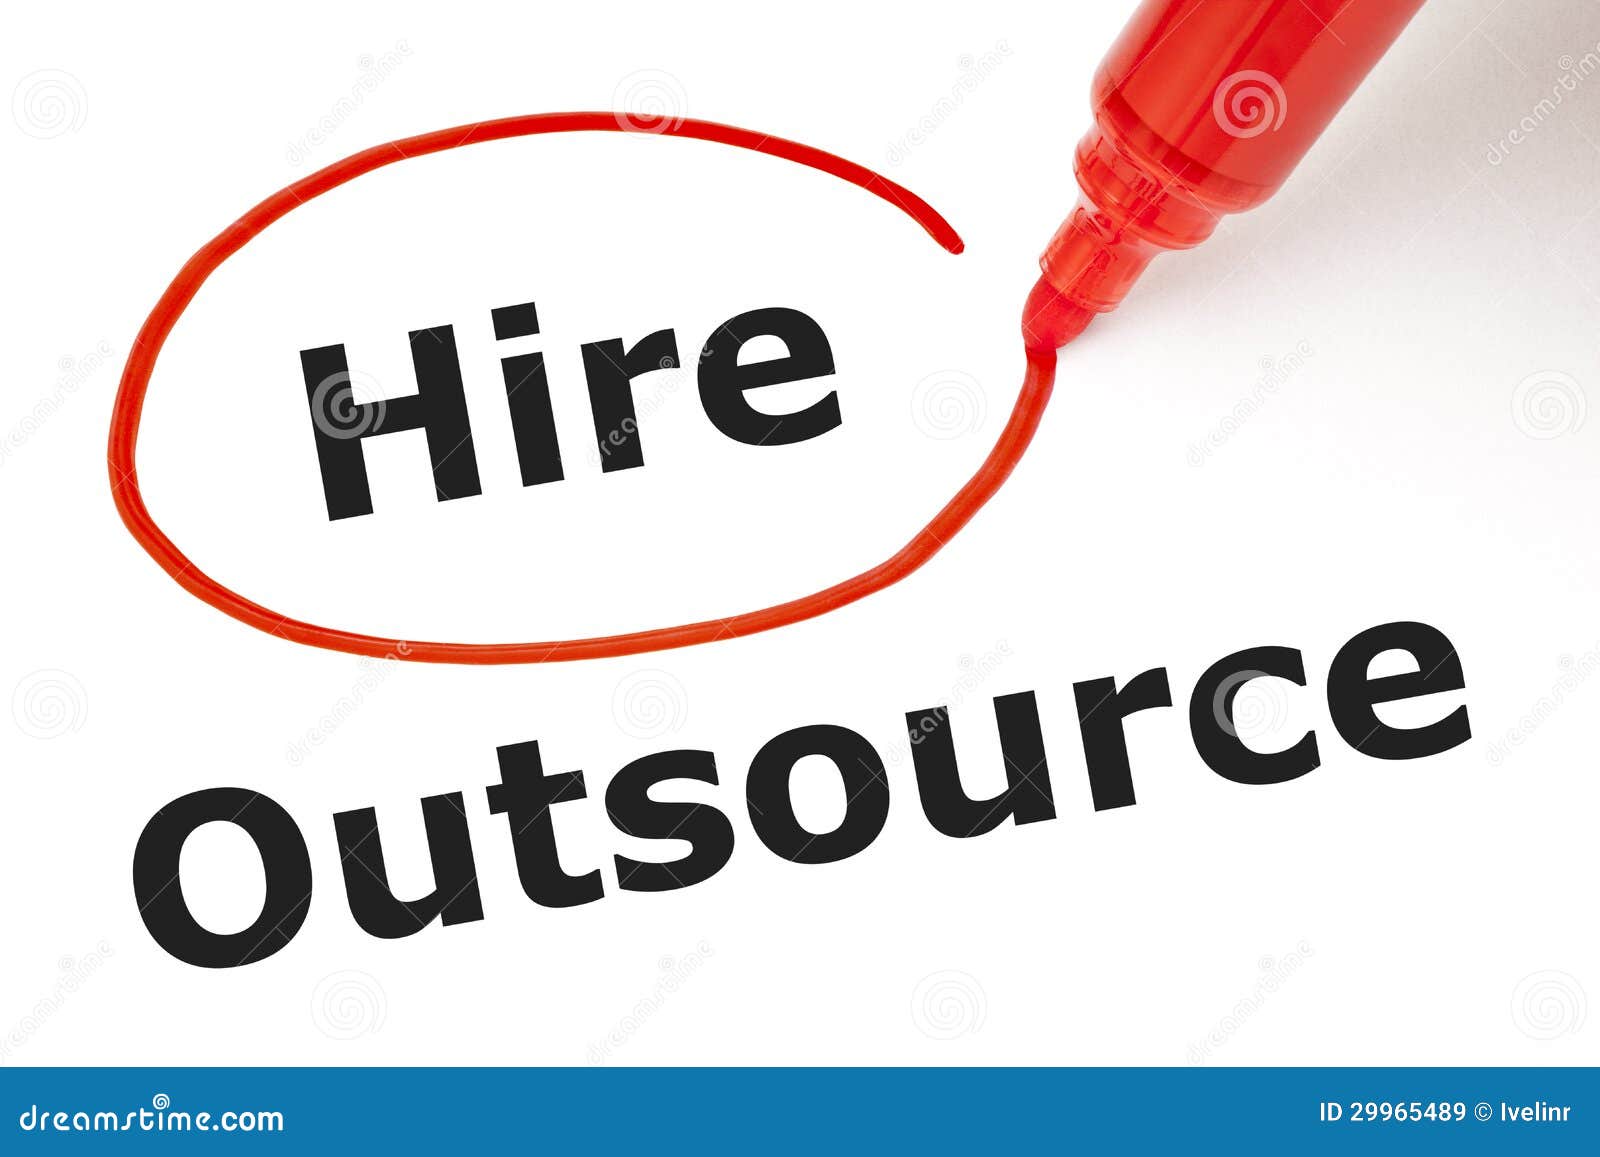 hire or outsource with red marker